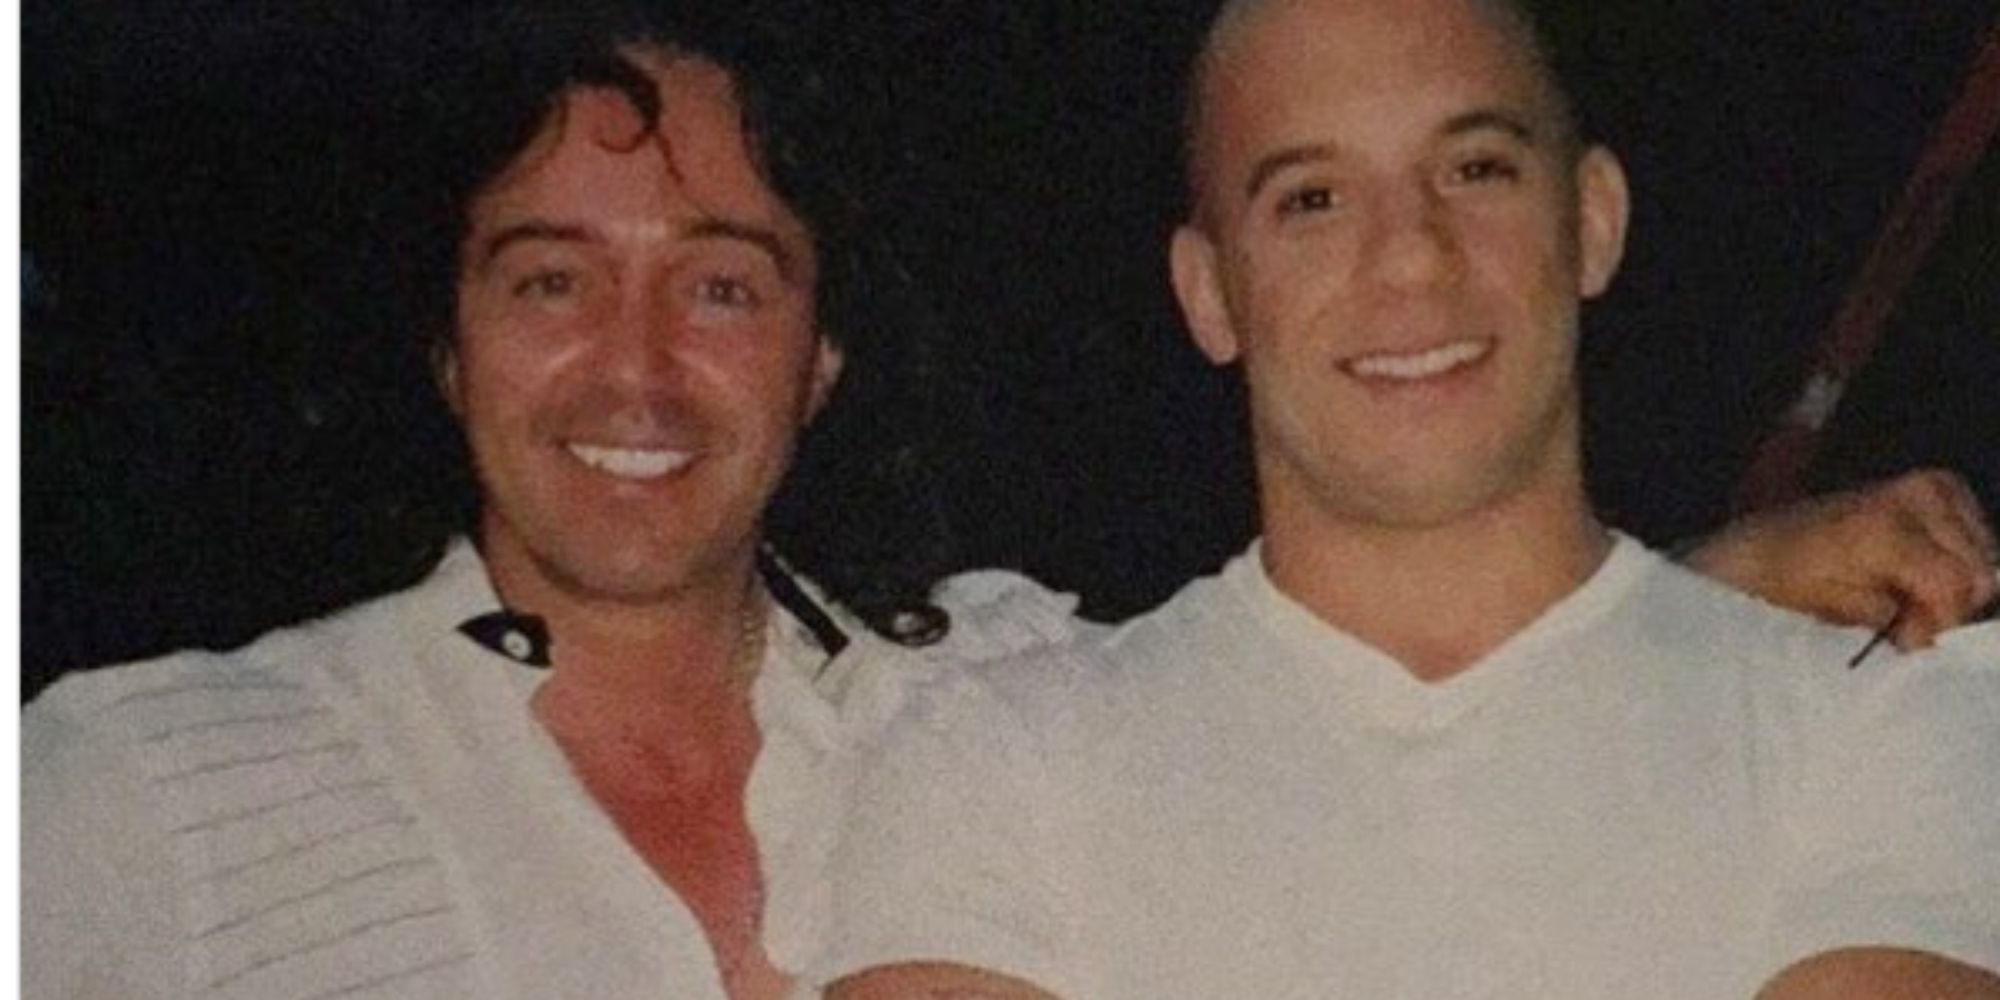 the bachelor nick georgas & vin diesel in white shirts posing side by side